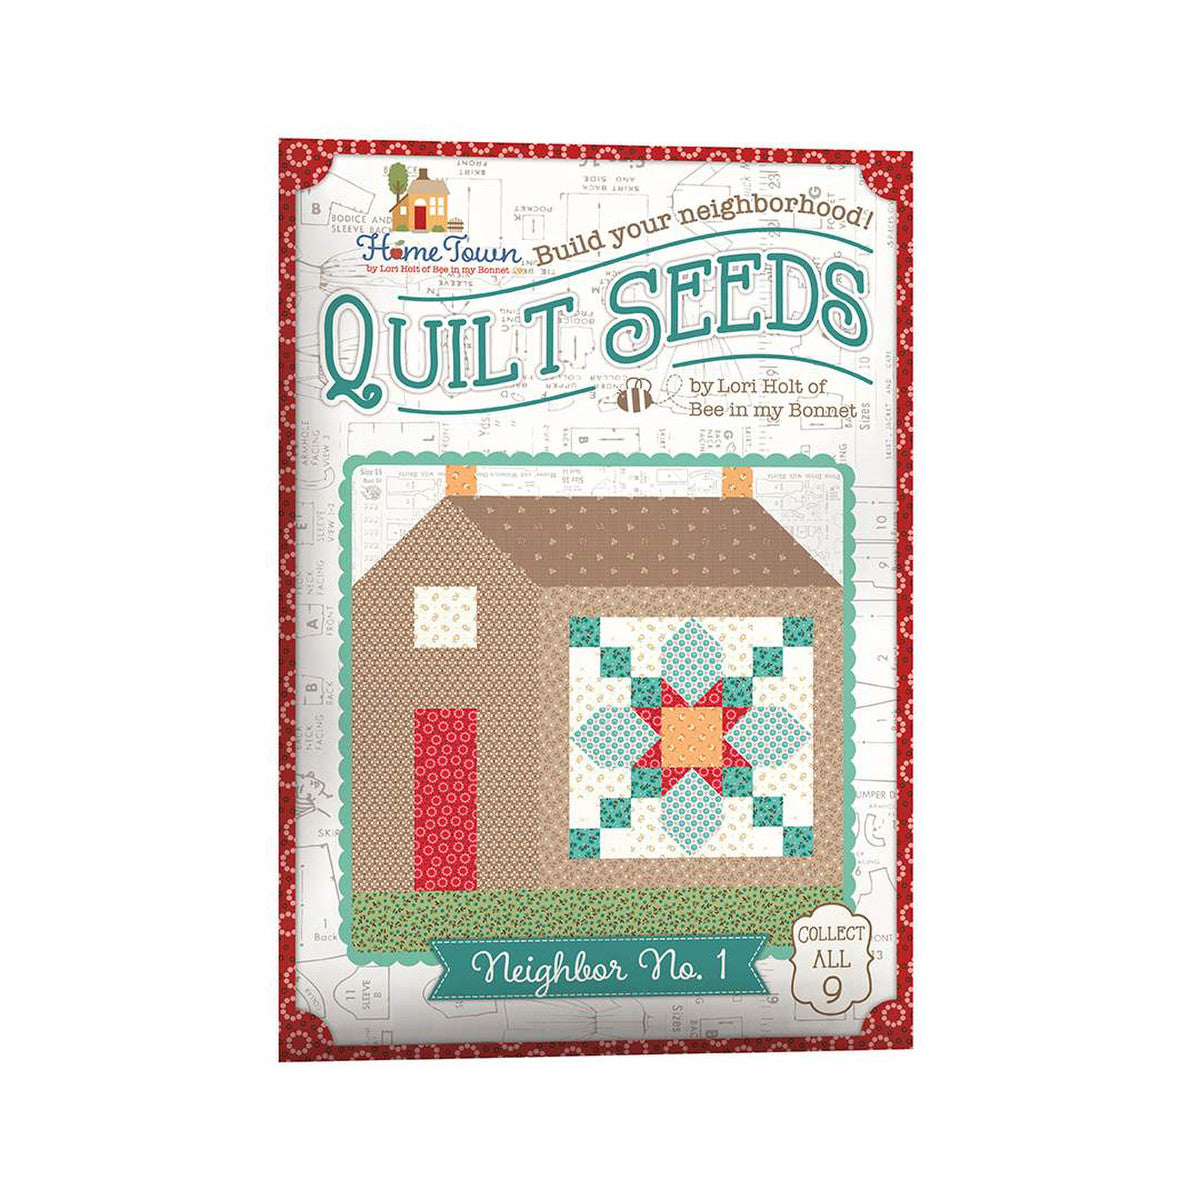 RESERVATION - Home Town Quilt Seeds Block of the Month by Lori Holt ...